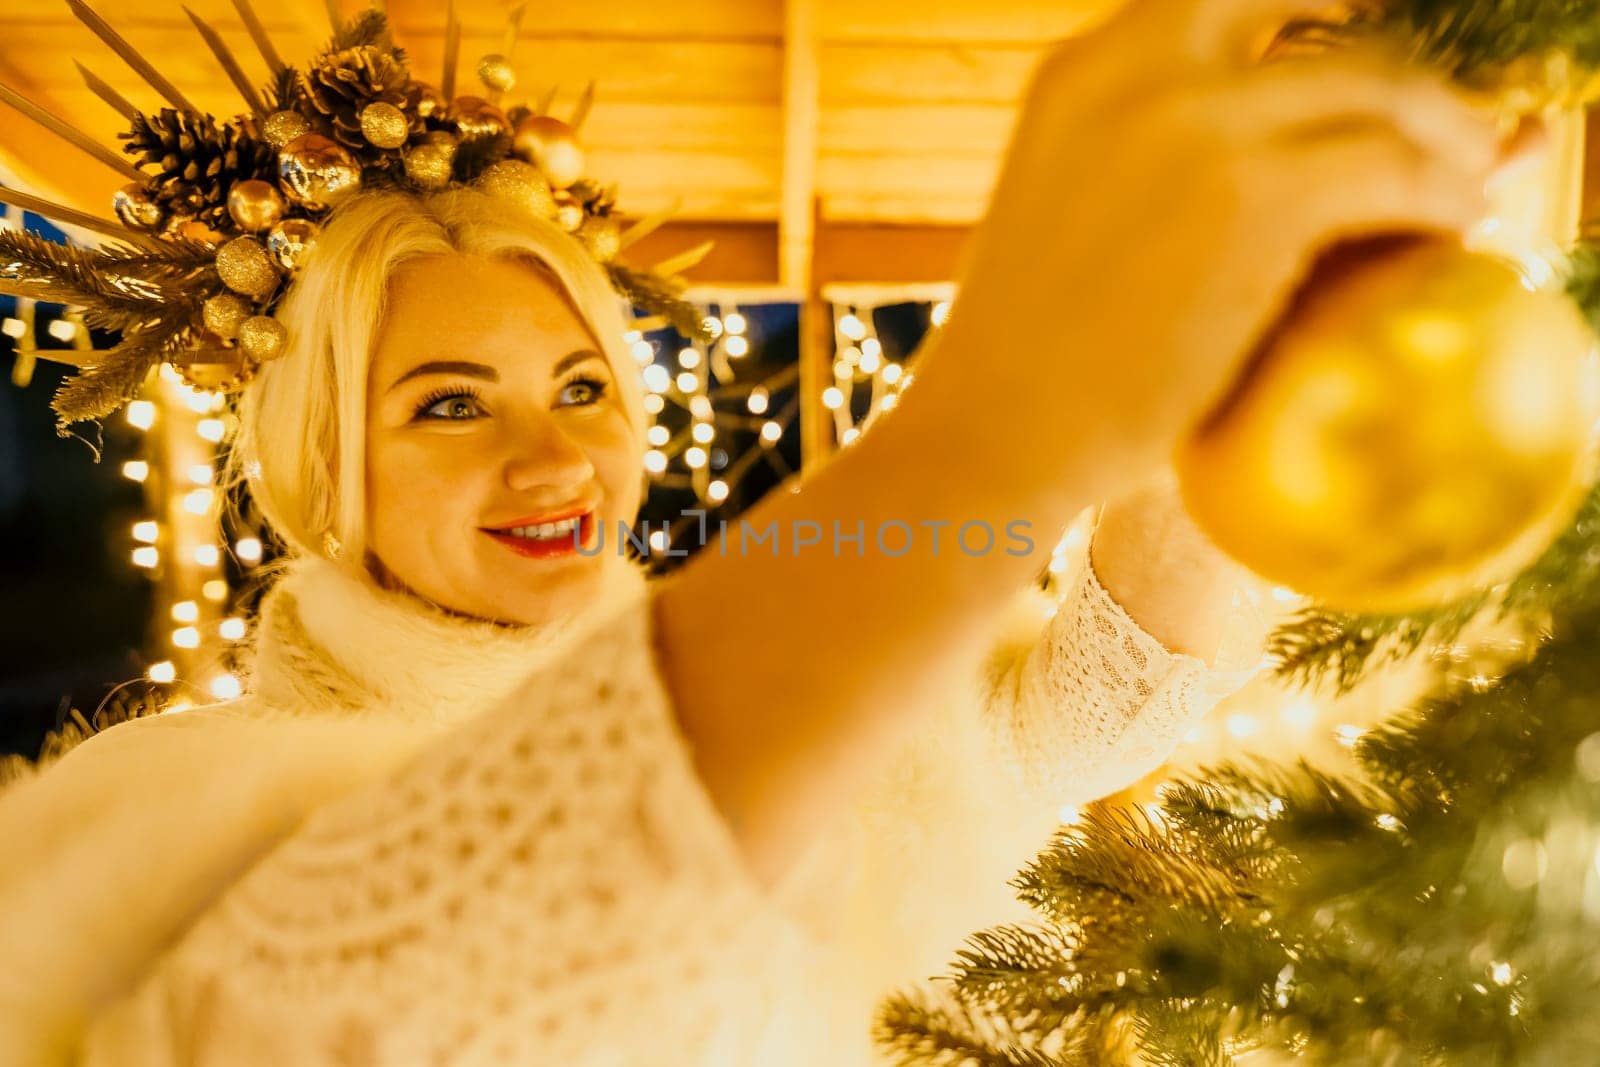 A blonde woman in white dress and a crown of gold ornaments decorate Christmas tree with gold ornaments and lights. The tree is decorated with gold balls and is lit up with lights. by panophotograph